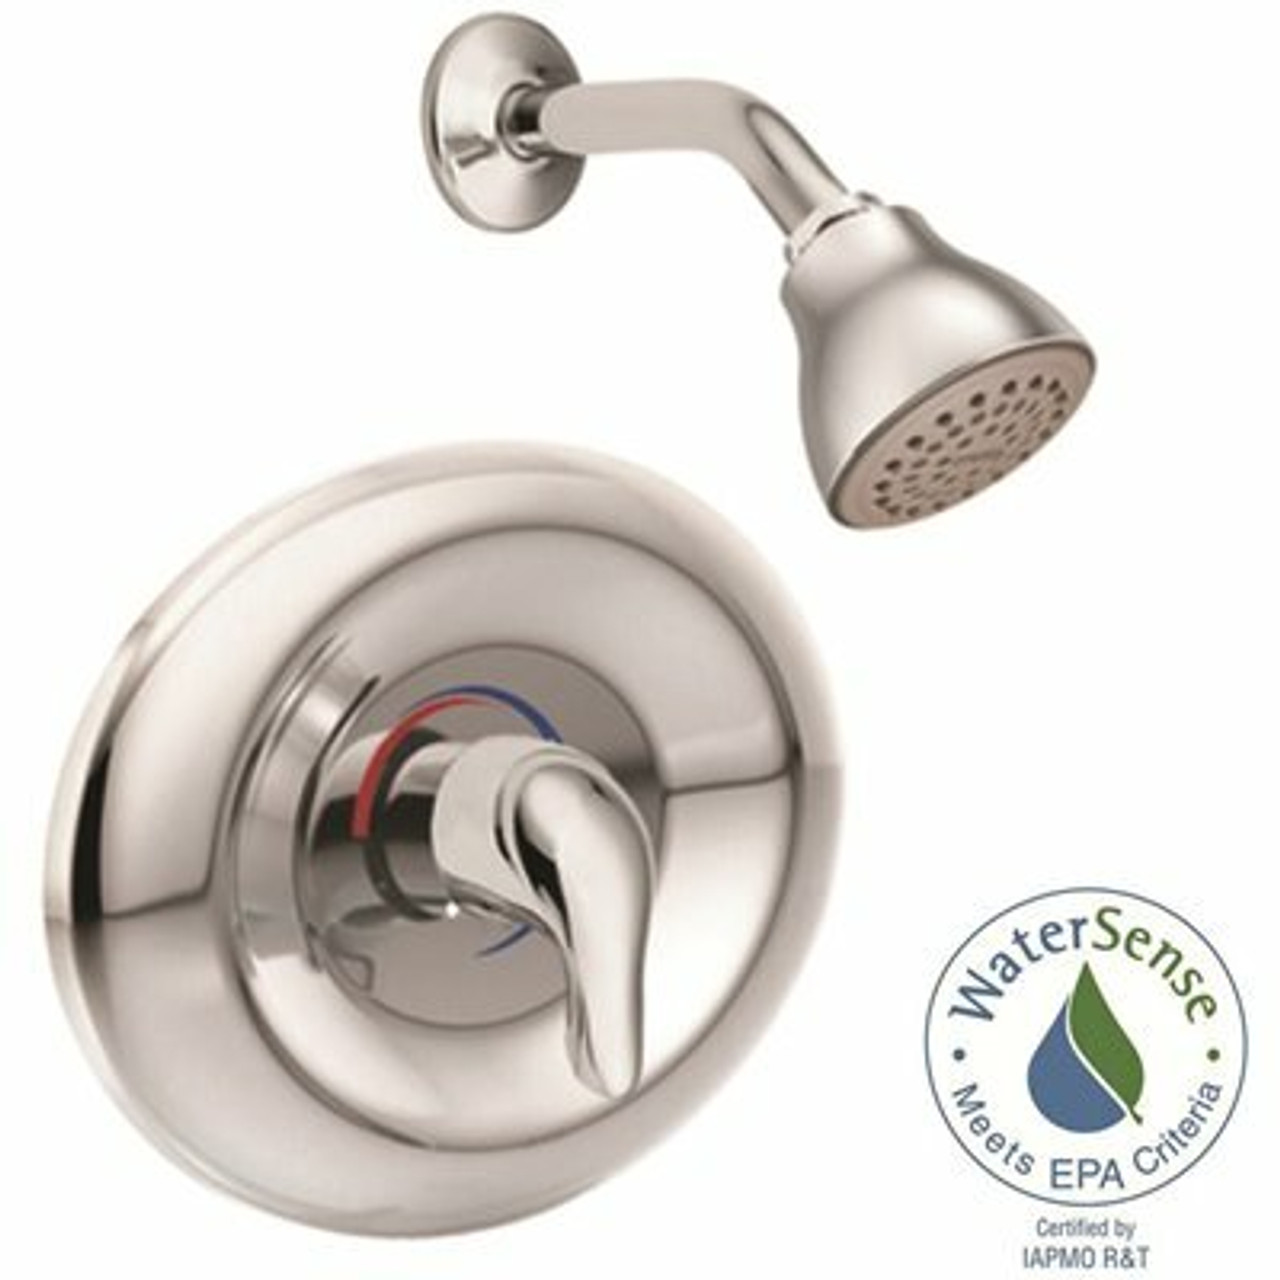 Moen Chateau Lever 1-Handle 1-Spray Tub And Shower Faucet Trim Kit In Chrome (Valve Not Included)